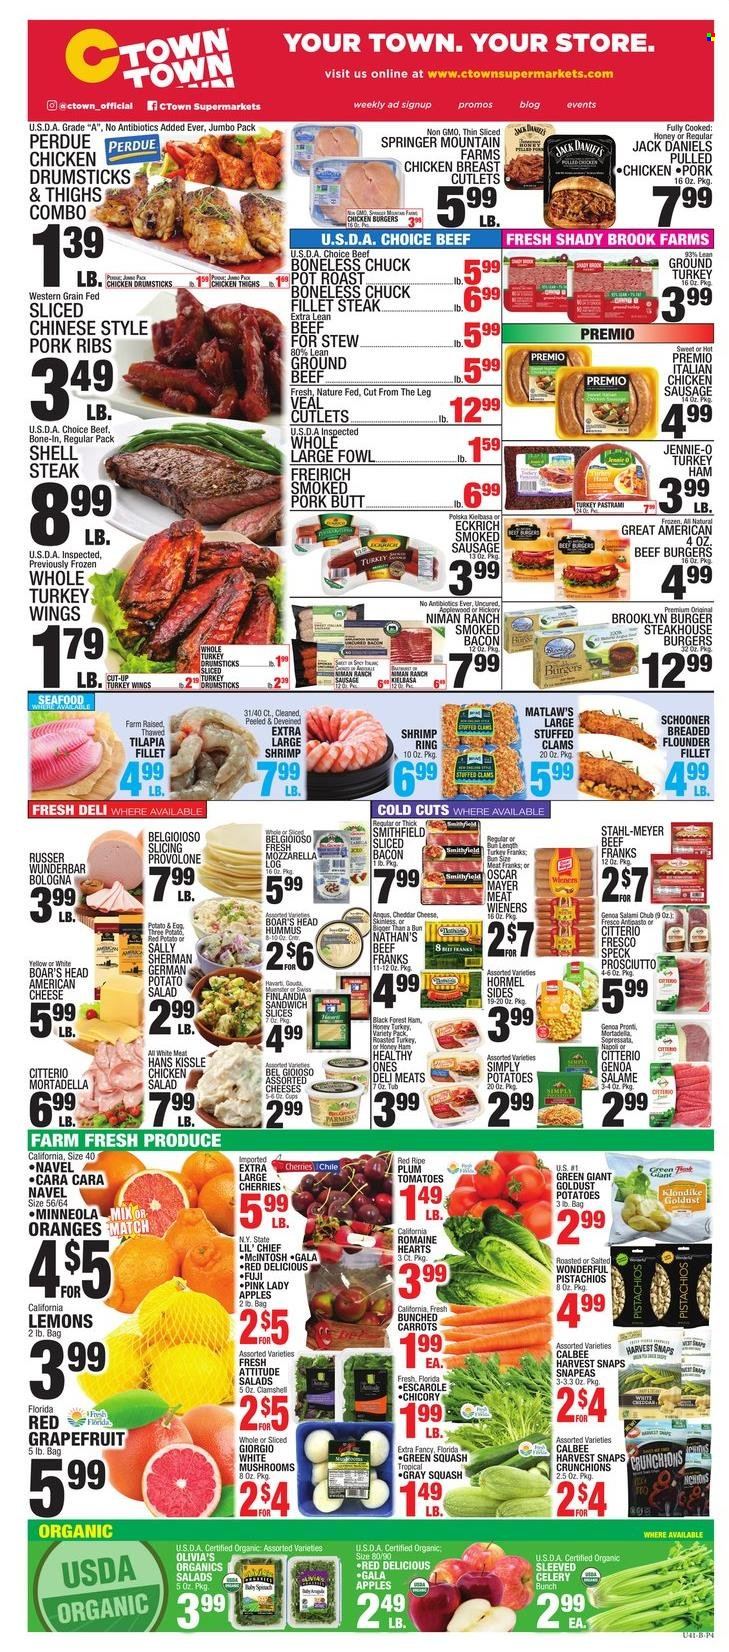 thumbnail - C-Town Flyer - 01/21/2022 - 01/27/2022 - Sales products - mushrooms, carrots, celery, tomatoes, zucchini, potatoes, sleeved celery, apples, Gala, grapefruits, Red Delicious apples, cherries, oranges, Pink Lady, clams, flounder, tilapia, seafood, shrimps, sandwich, hamburger, beef burger, Perdue®, Hormel, bacon, mortadella, salami, ham, prosciutto, pastrami, sausage, smoked sausage, hummus, potato salad, chicken salad, american cheese, mozzarella, cheddar, cheese, Provolone, Harvest Snaps, pistachios, beer, ground turkey, chicken drumsticks, beef meat, ground beef, veal cutlet, veal meat, steak, pork meat, pork ribs, lemons. Page 4.